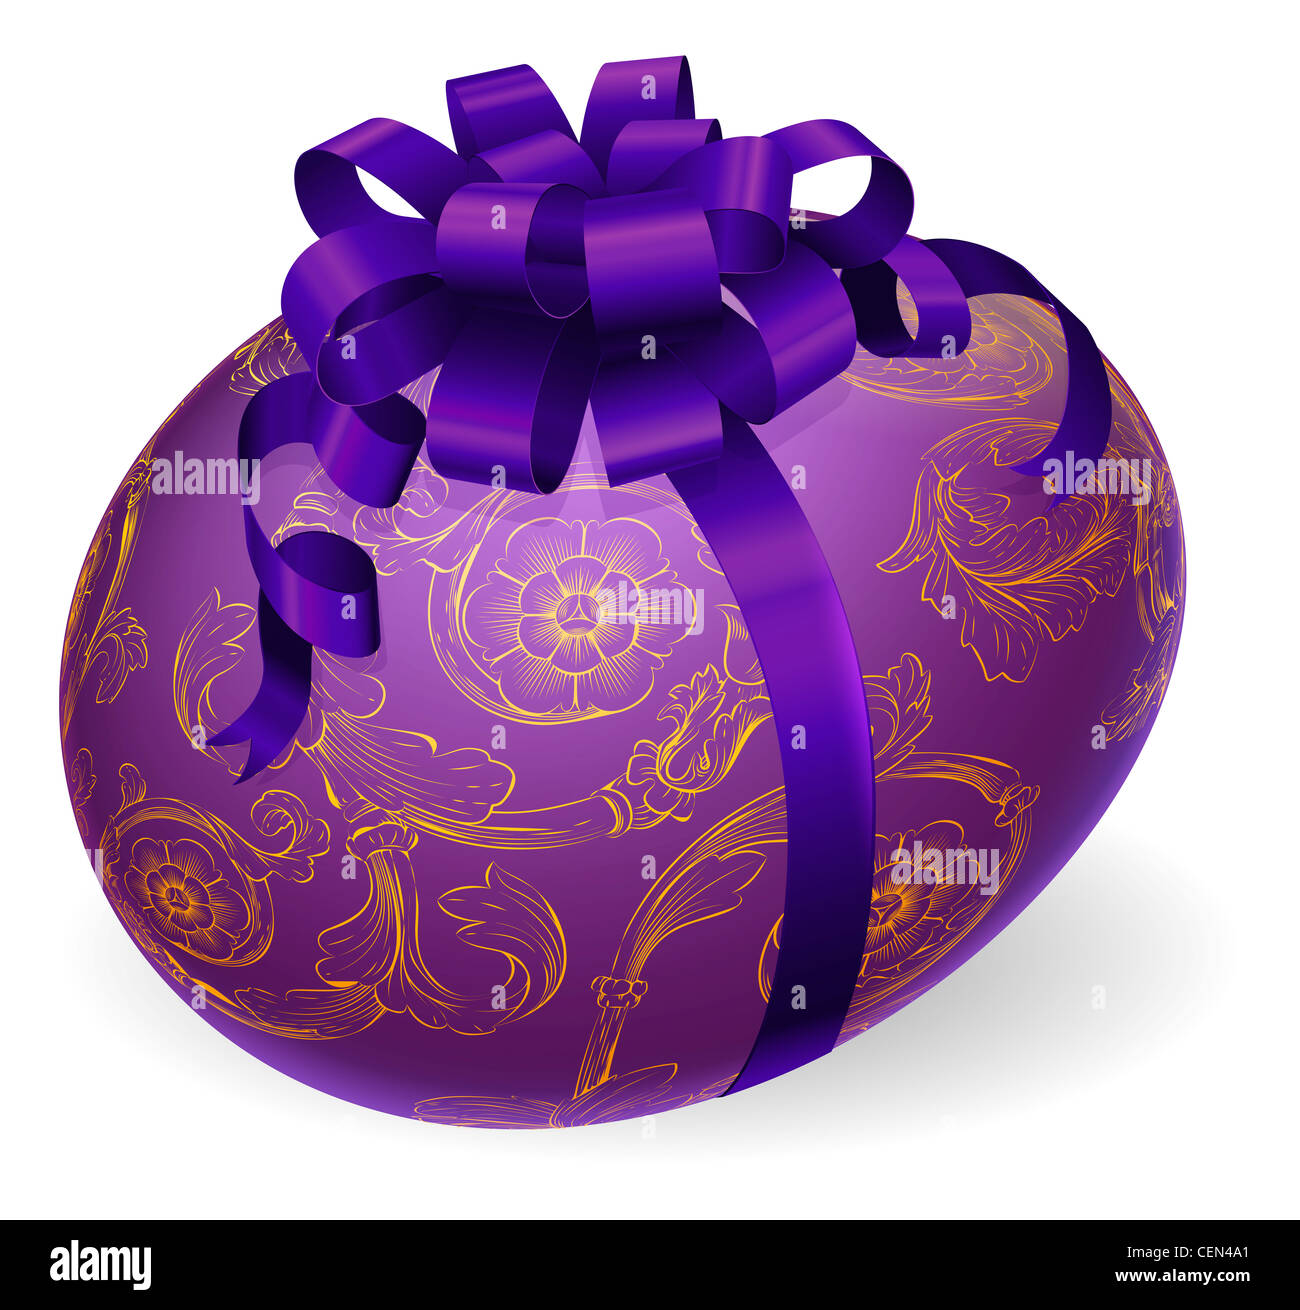 Illustration of a luxury patterned Easter egg wrapped with satin bow Stock Photo